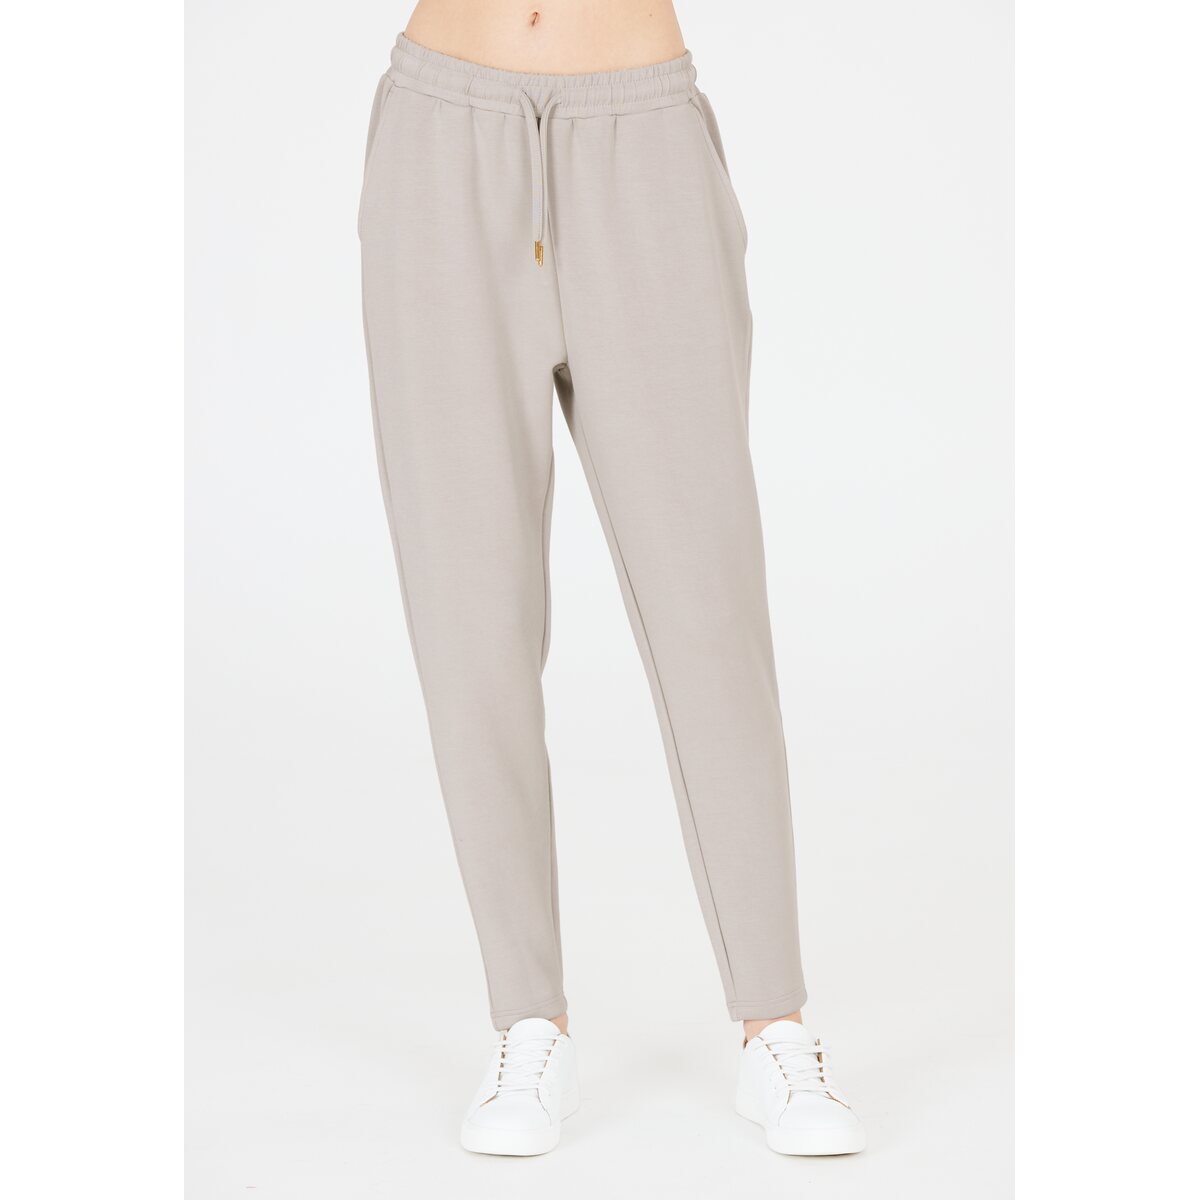 Athlecia Jacey V2 Womenswear Sweat Pants 6 Shaws Department Stores